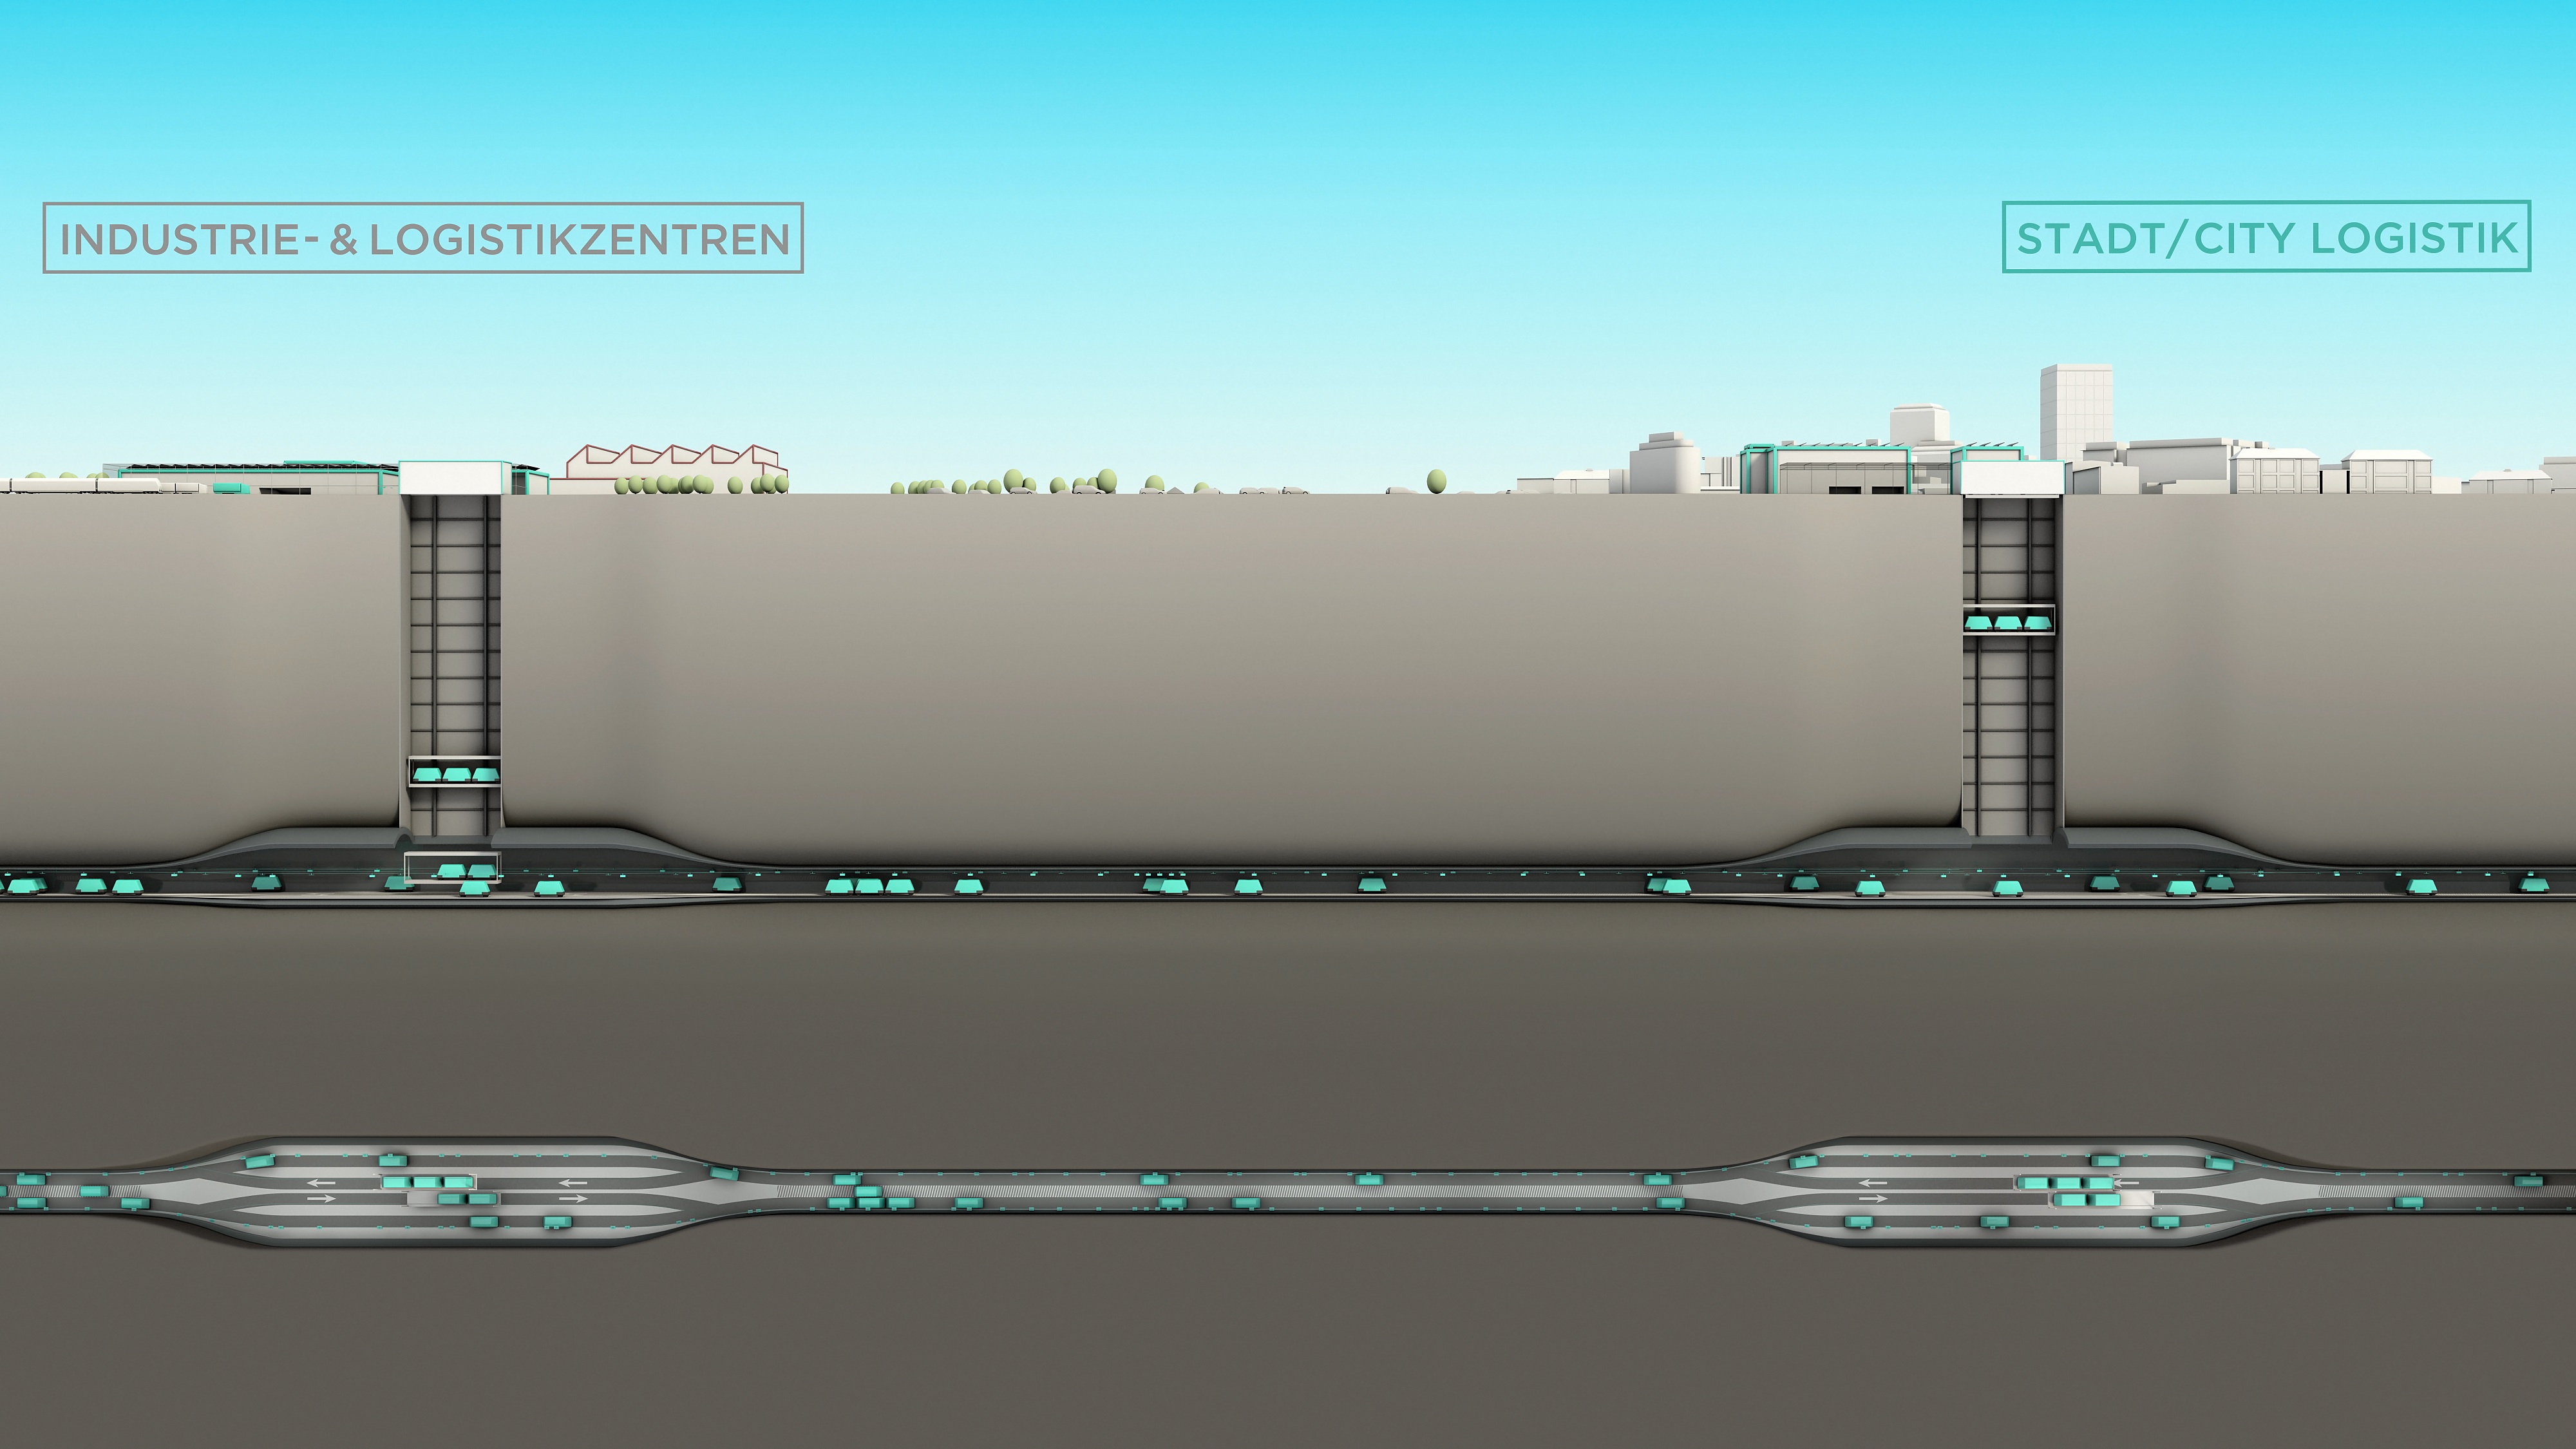 CST, lift and tunnel simulation